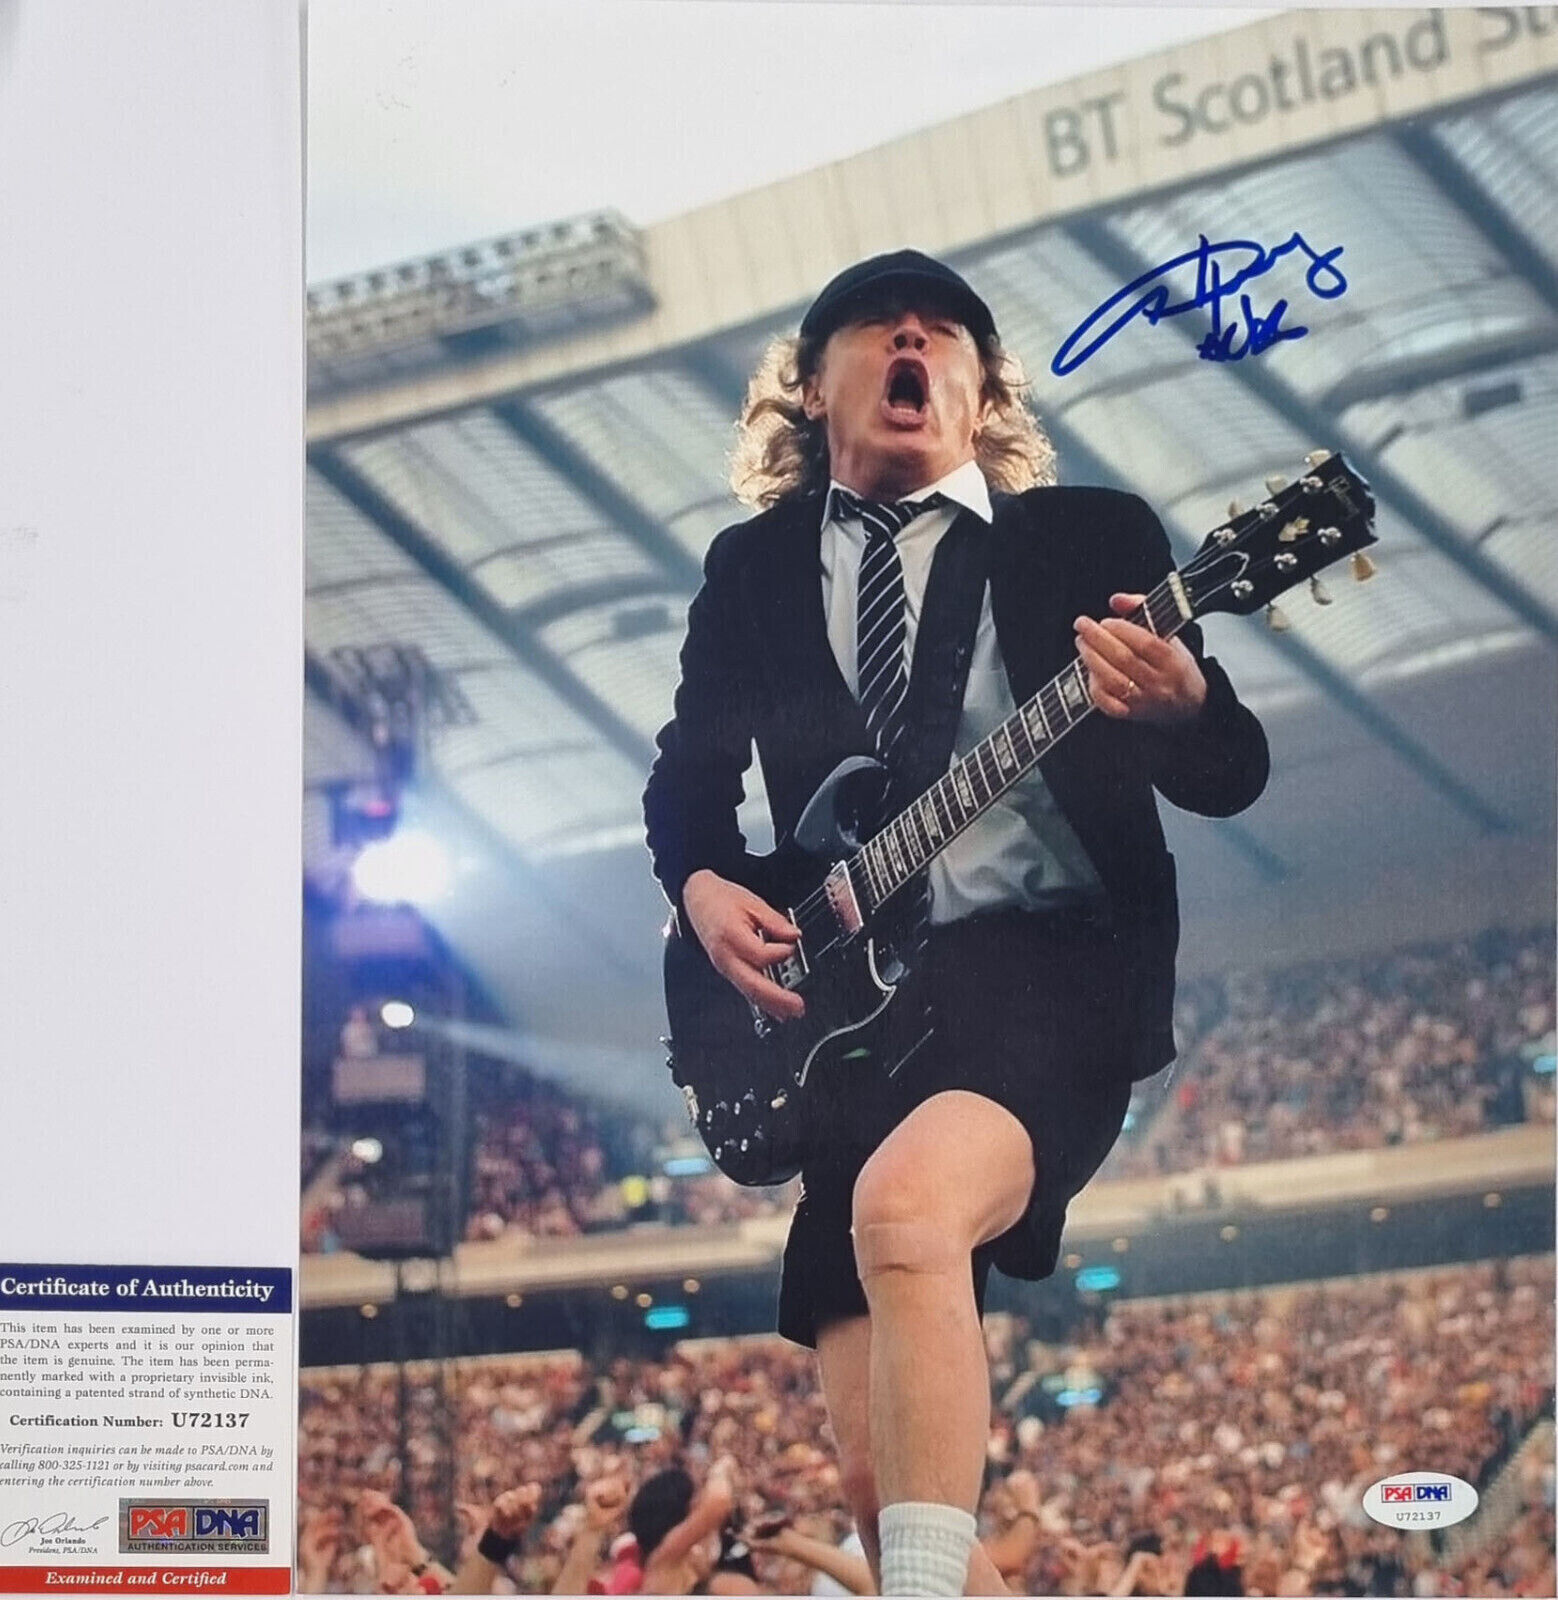 ACDC Angus Young hand signed 11x14 inch photograph (PSA DNA #U72137)